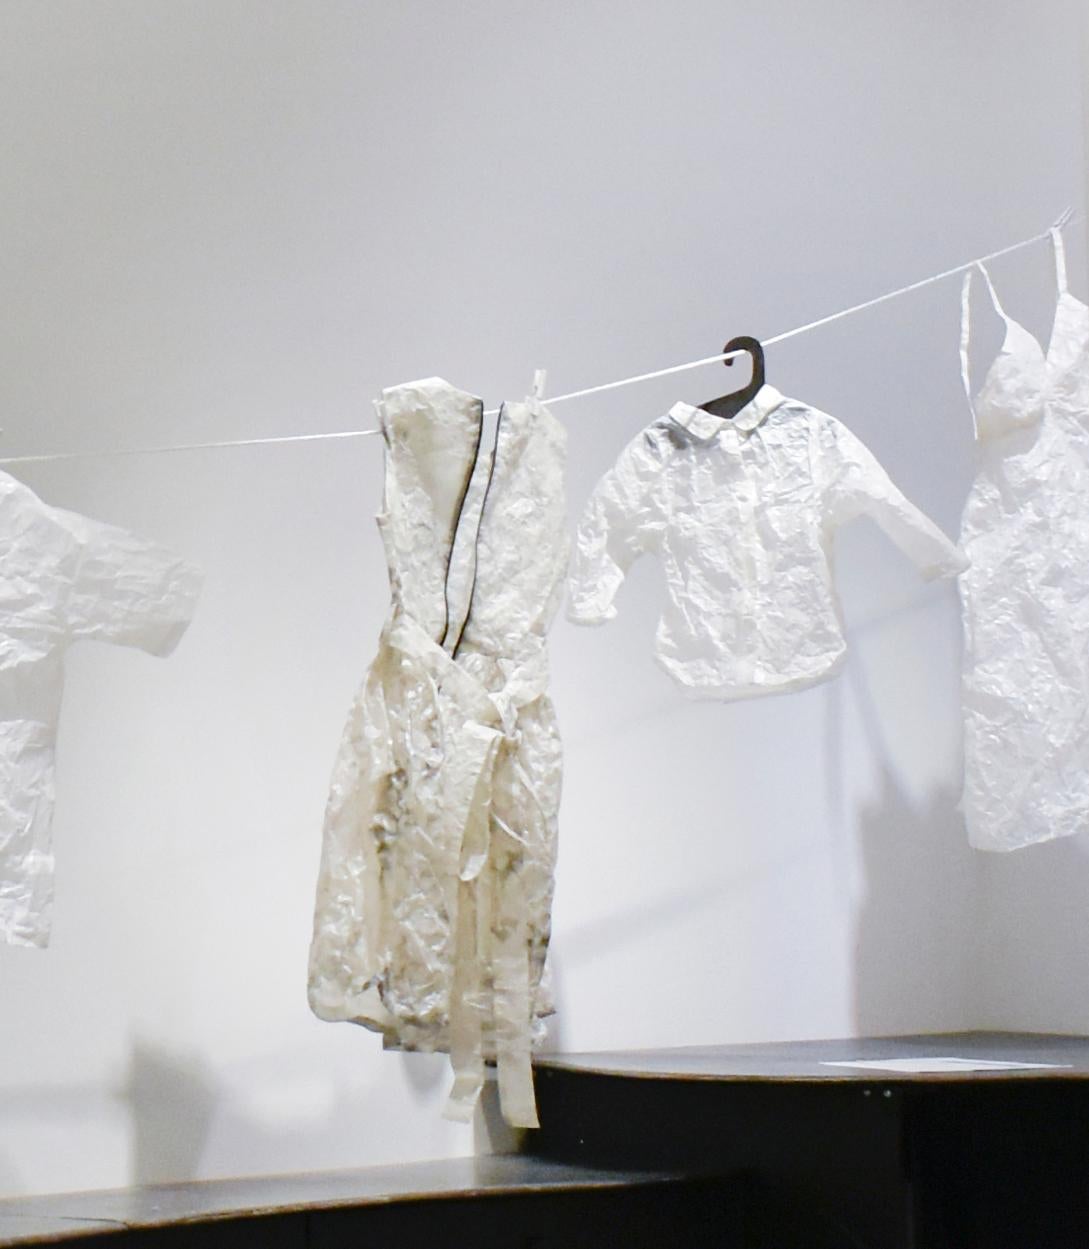 Child's Shirt, 2010
Figurative installation sculpture of wrinkled tee shirt
glassine paper and thread
19 x 24 inches (depth dimensions variable)

This contemporary installation sculpture was made by New Paltz, NY based artist, Kate Hamilton in 2010.